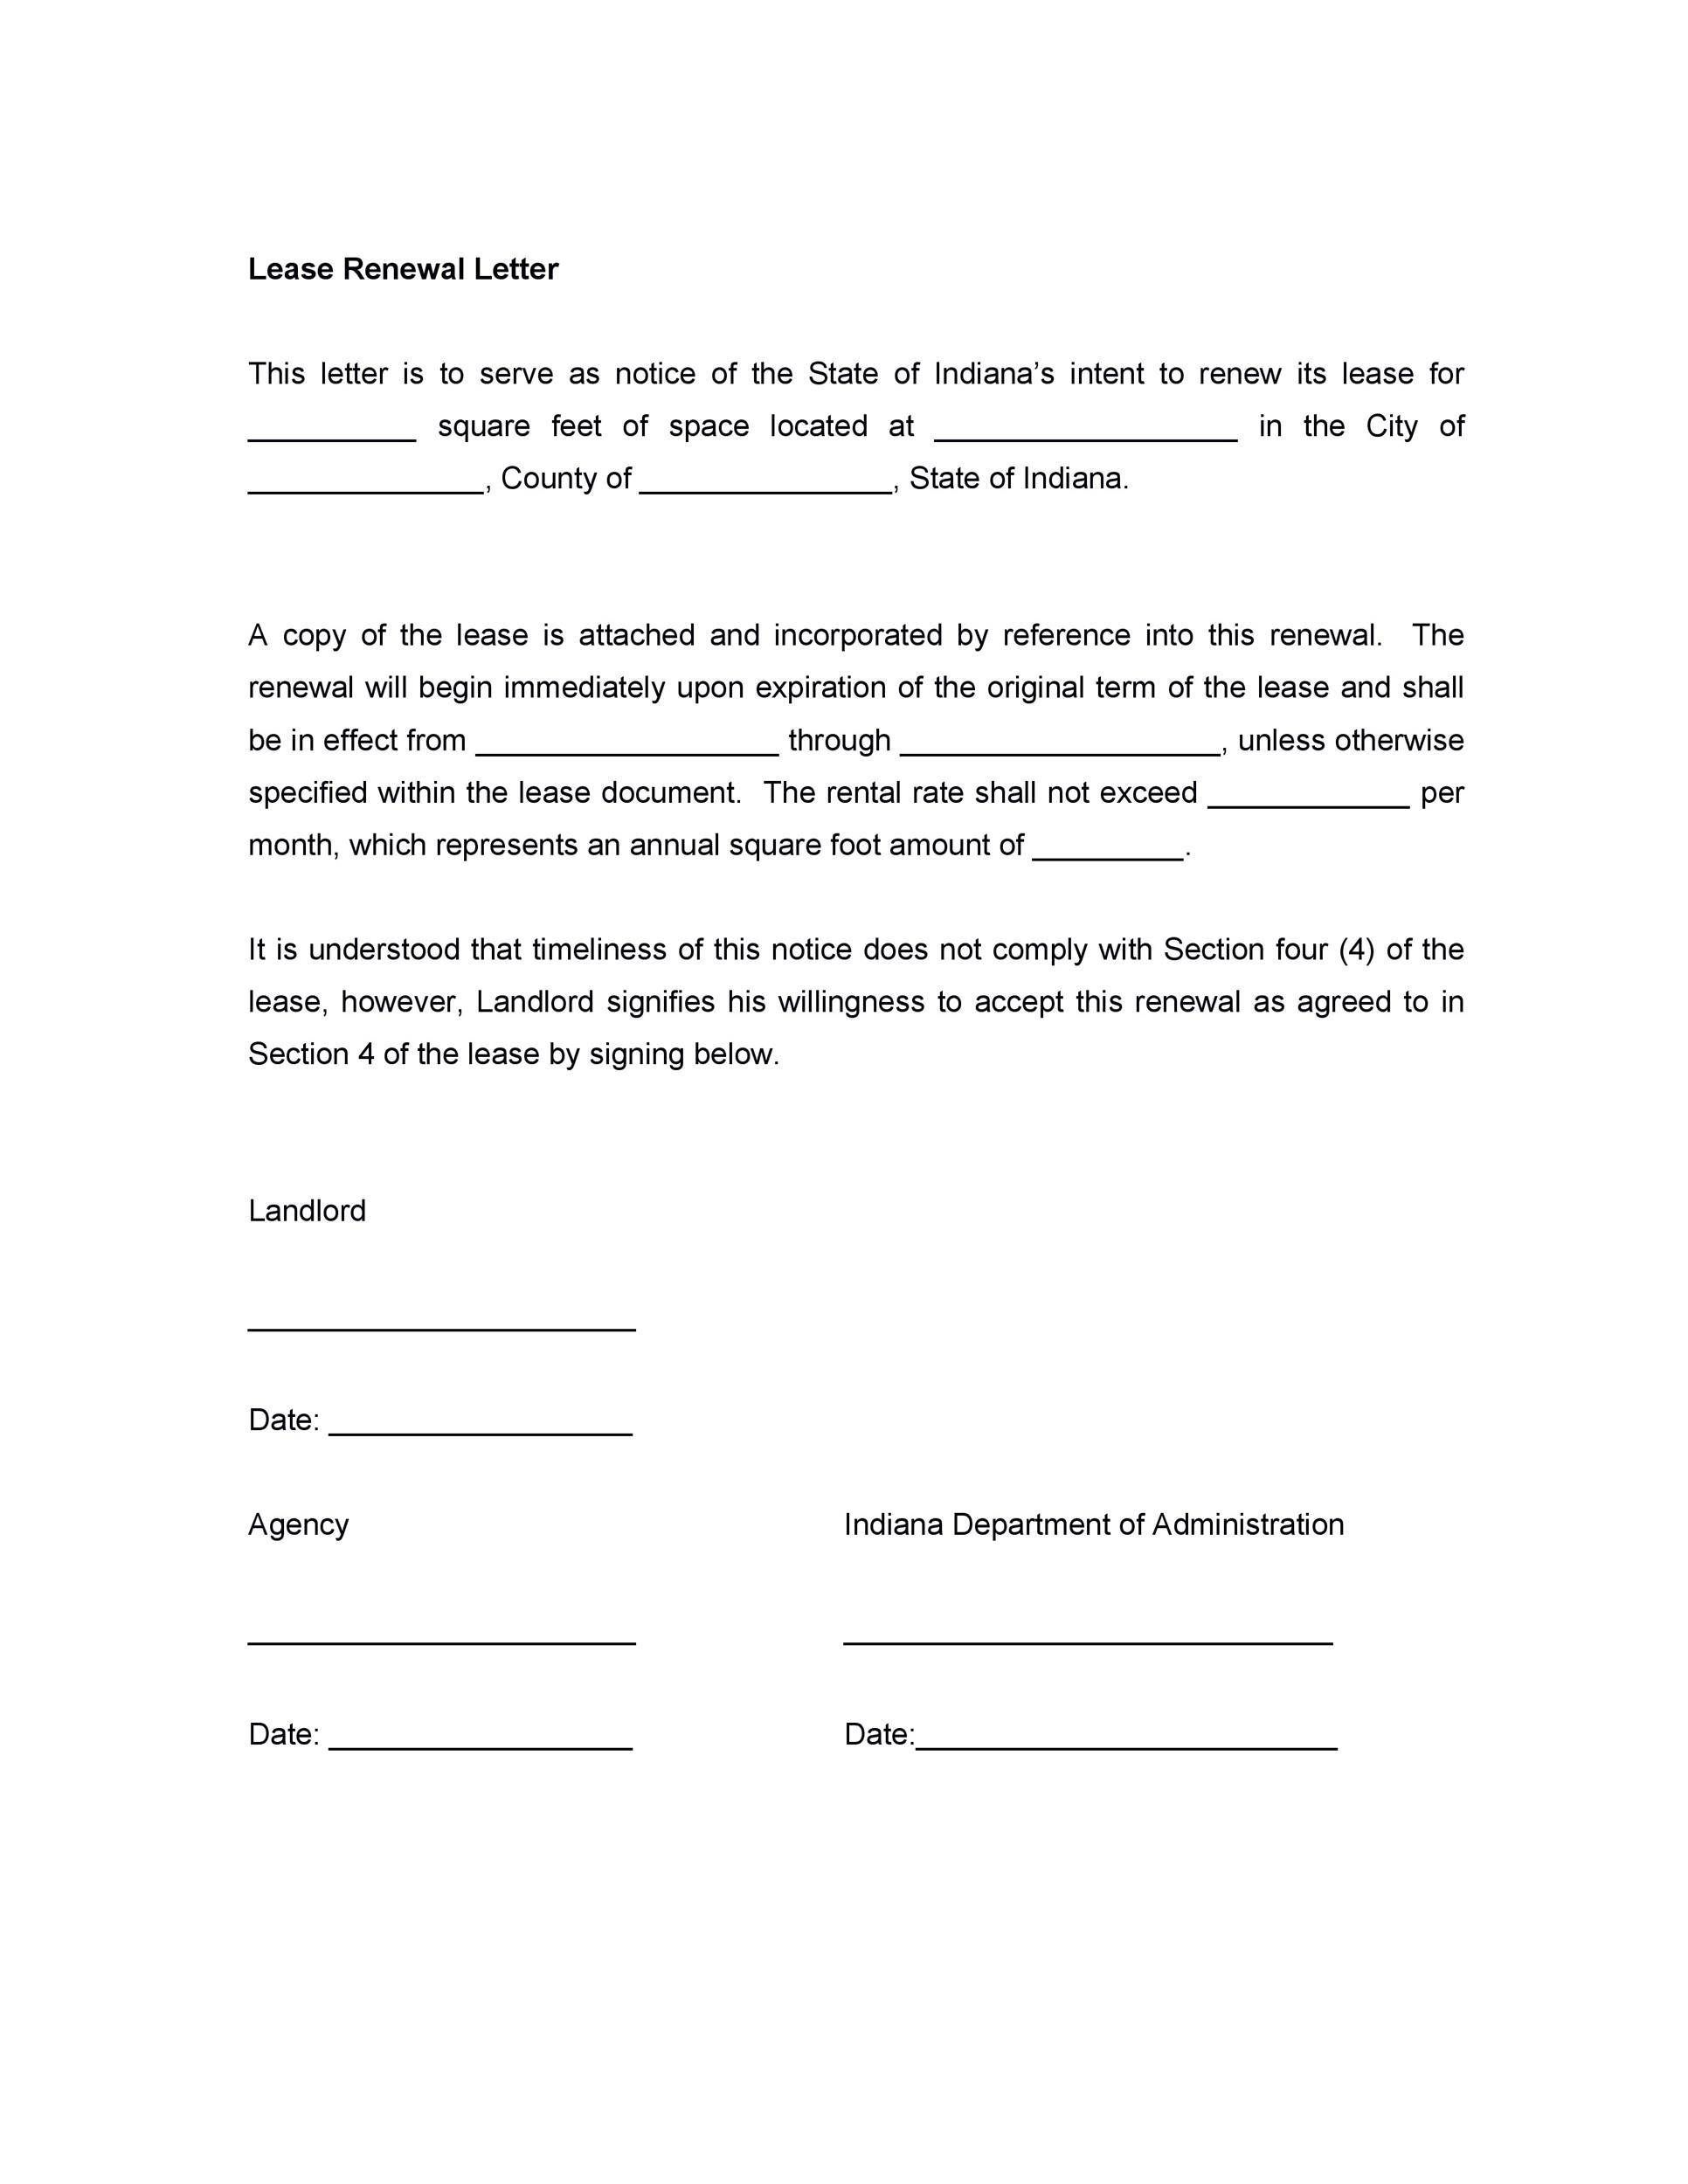 Sample Letter To Tenant To Keep Property Clean from templatelab.com